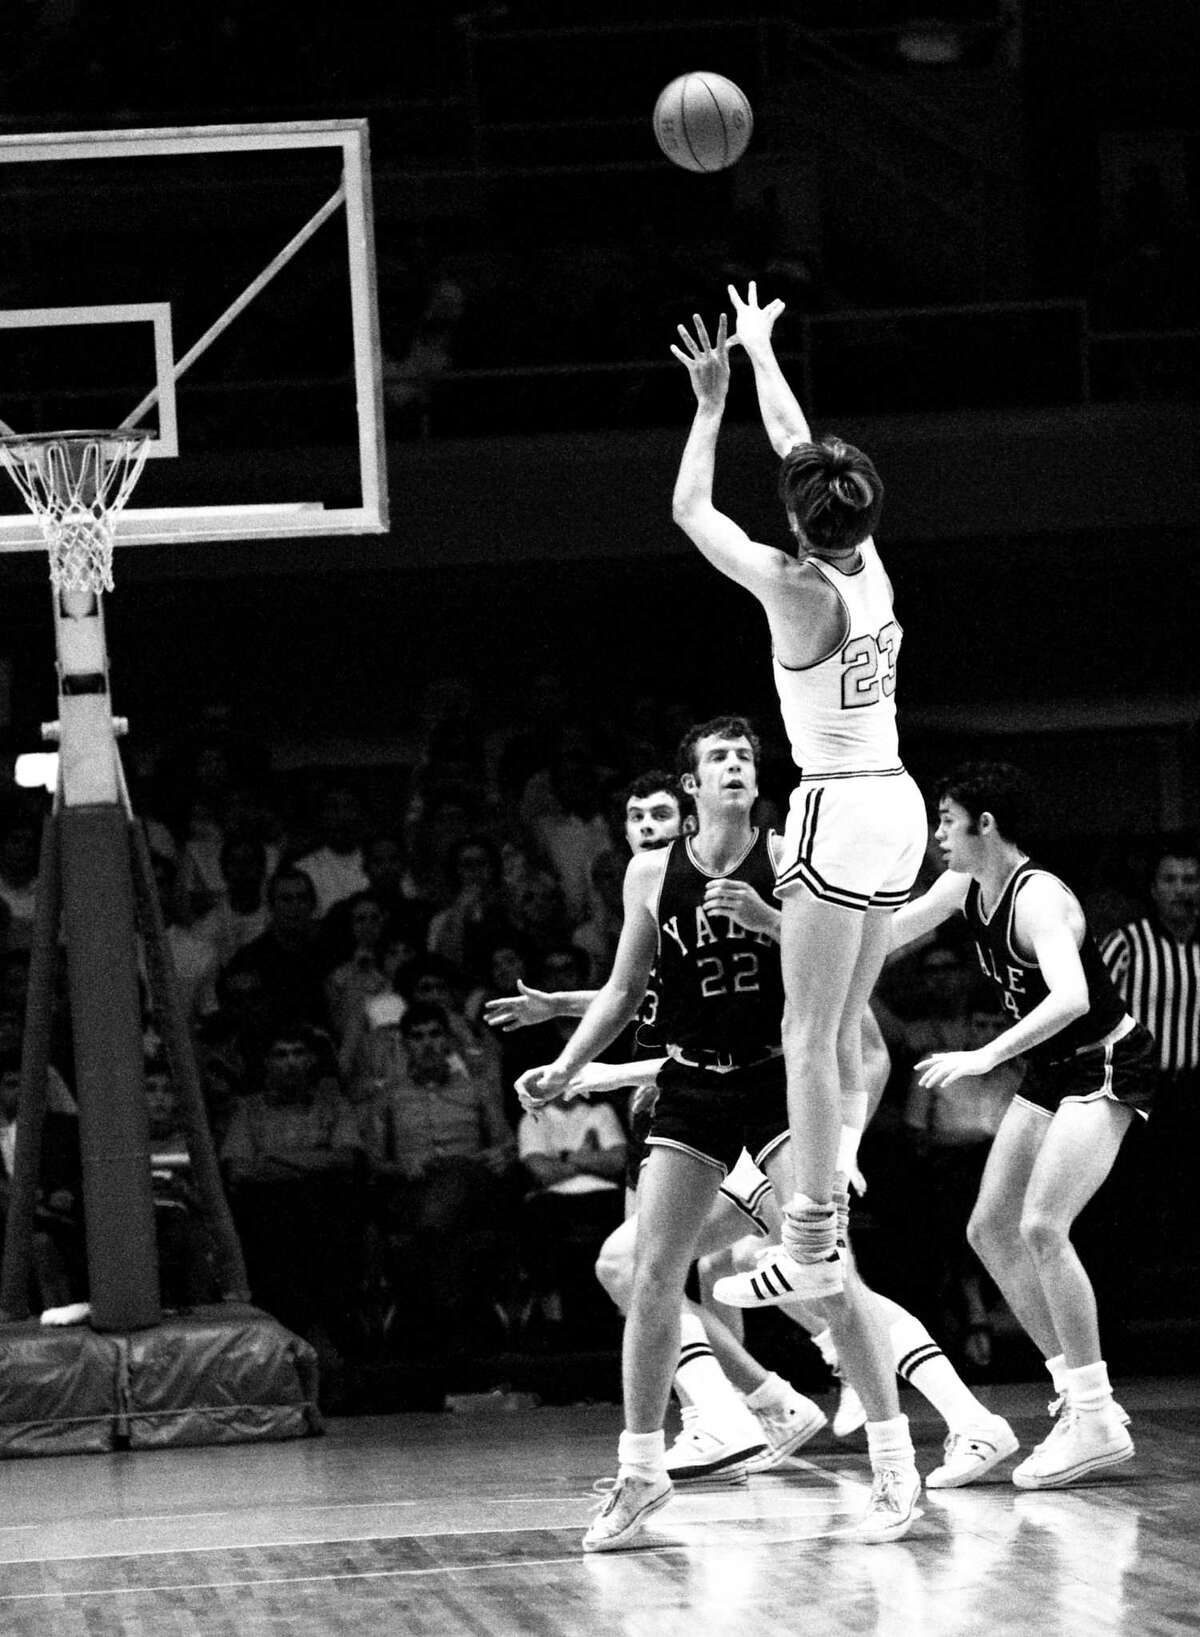 Yale pistoled Pete Maravich, LSU in first and only meeting 50 years ago